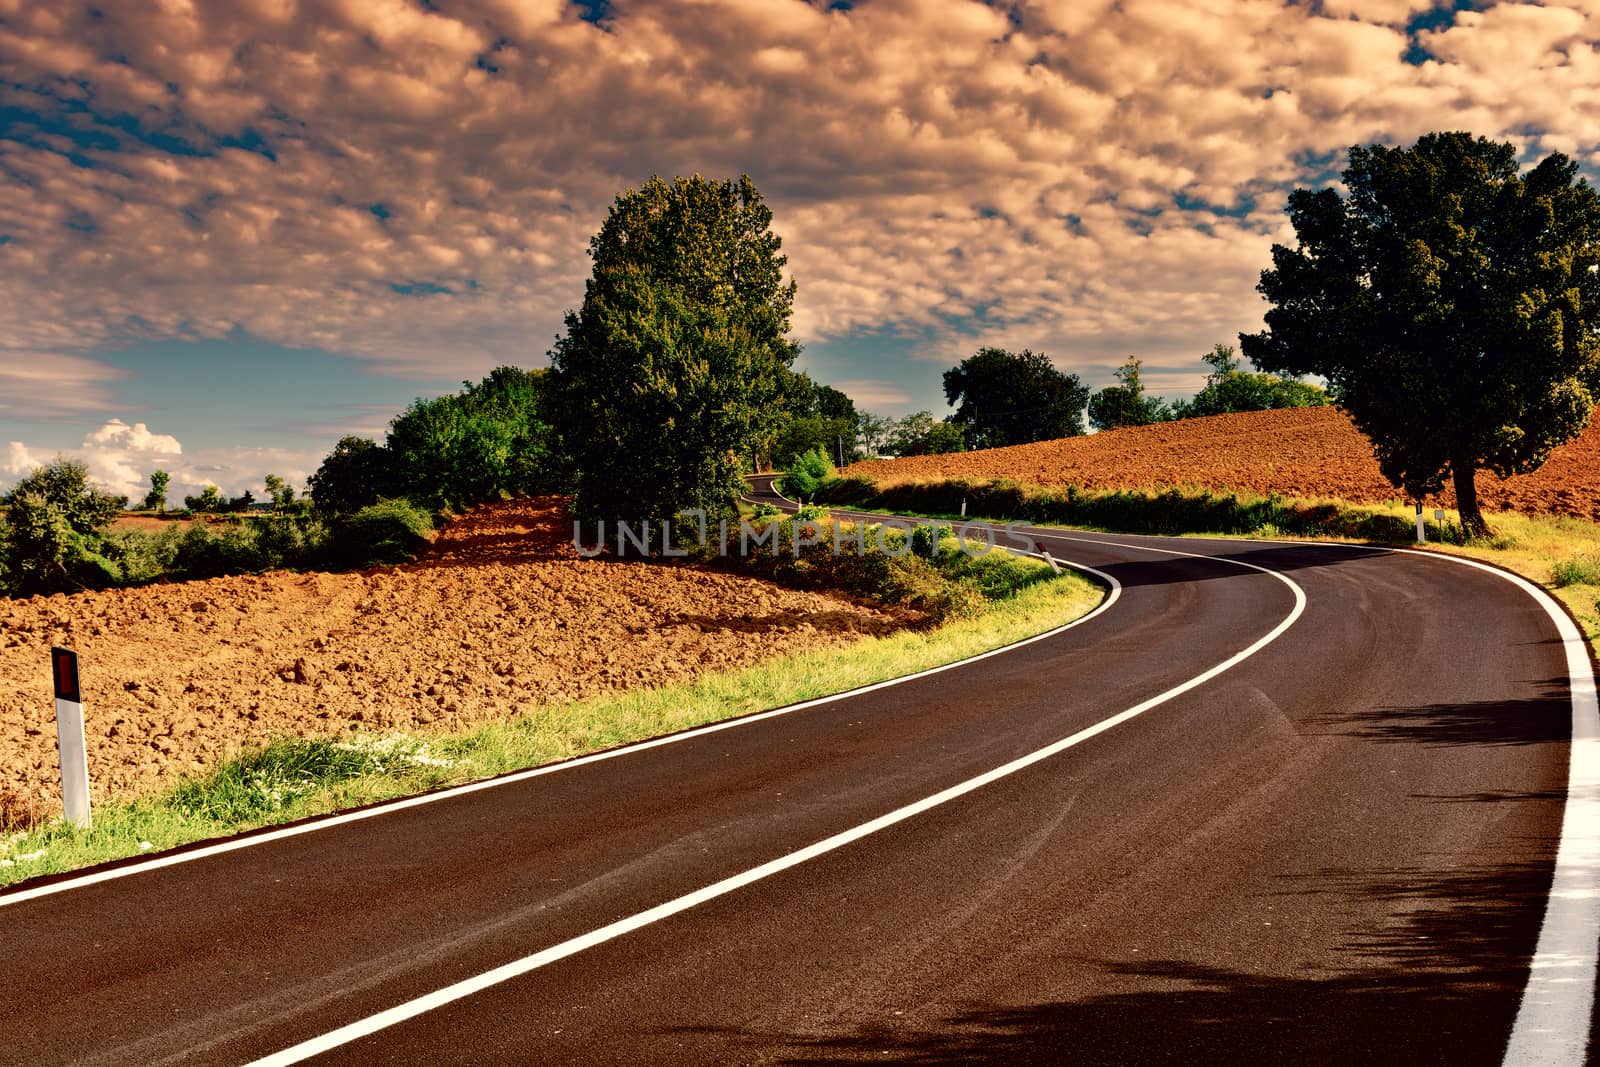 Winding Paved Road between Autumn Plowed Fields  in Tuscany at Sunset, Vintage Style Toned Picture